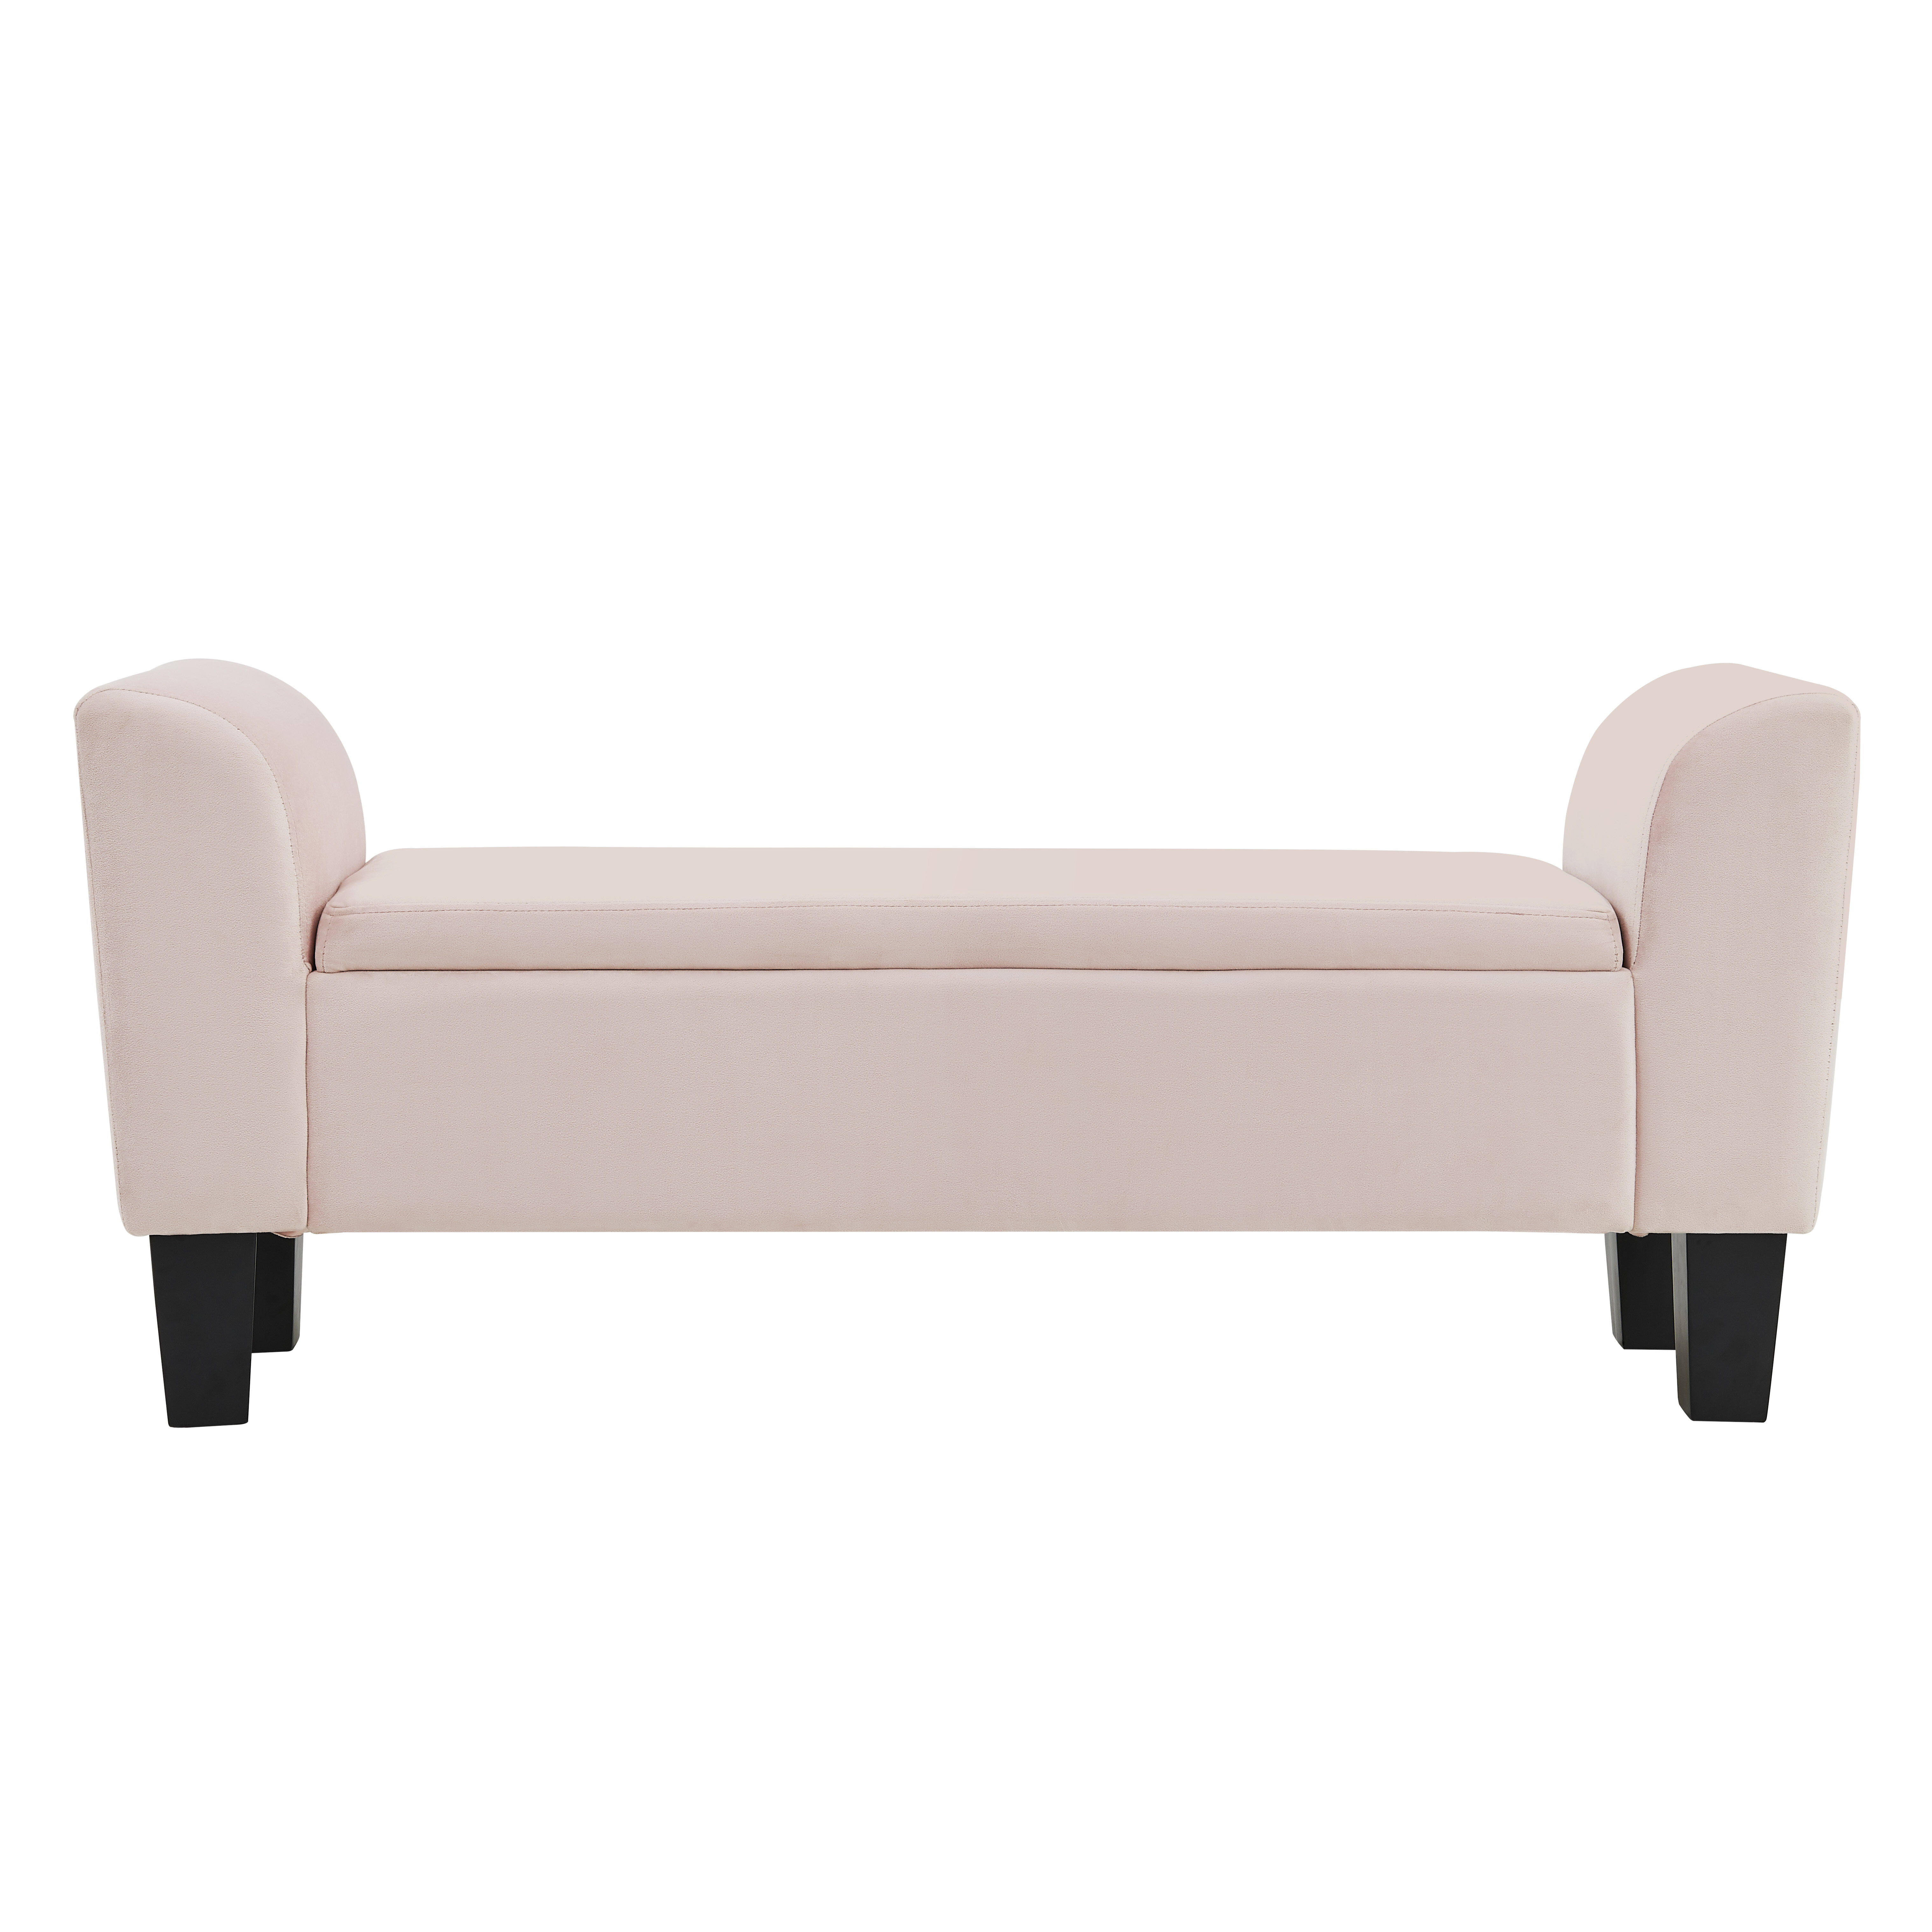 Modern Upholstered Bench White Leather Tufted Extra Seat Ottoman Curved Legs 